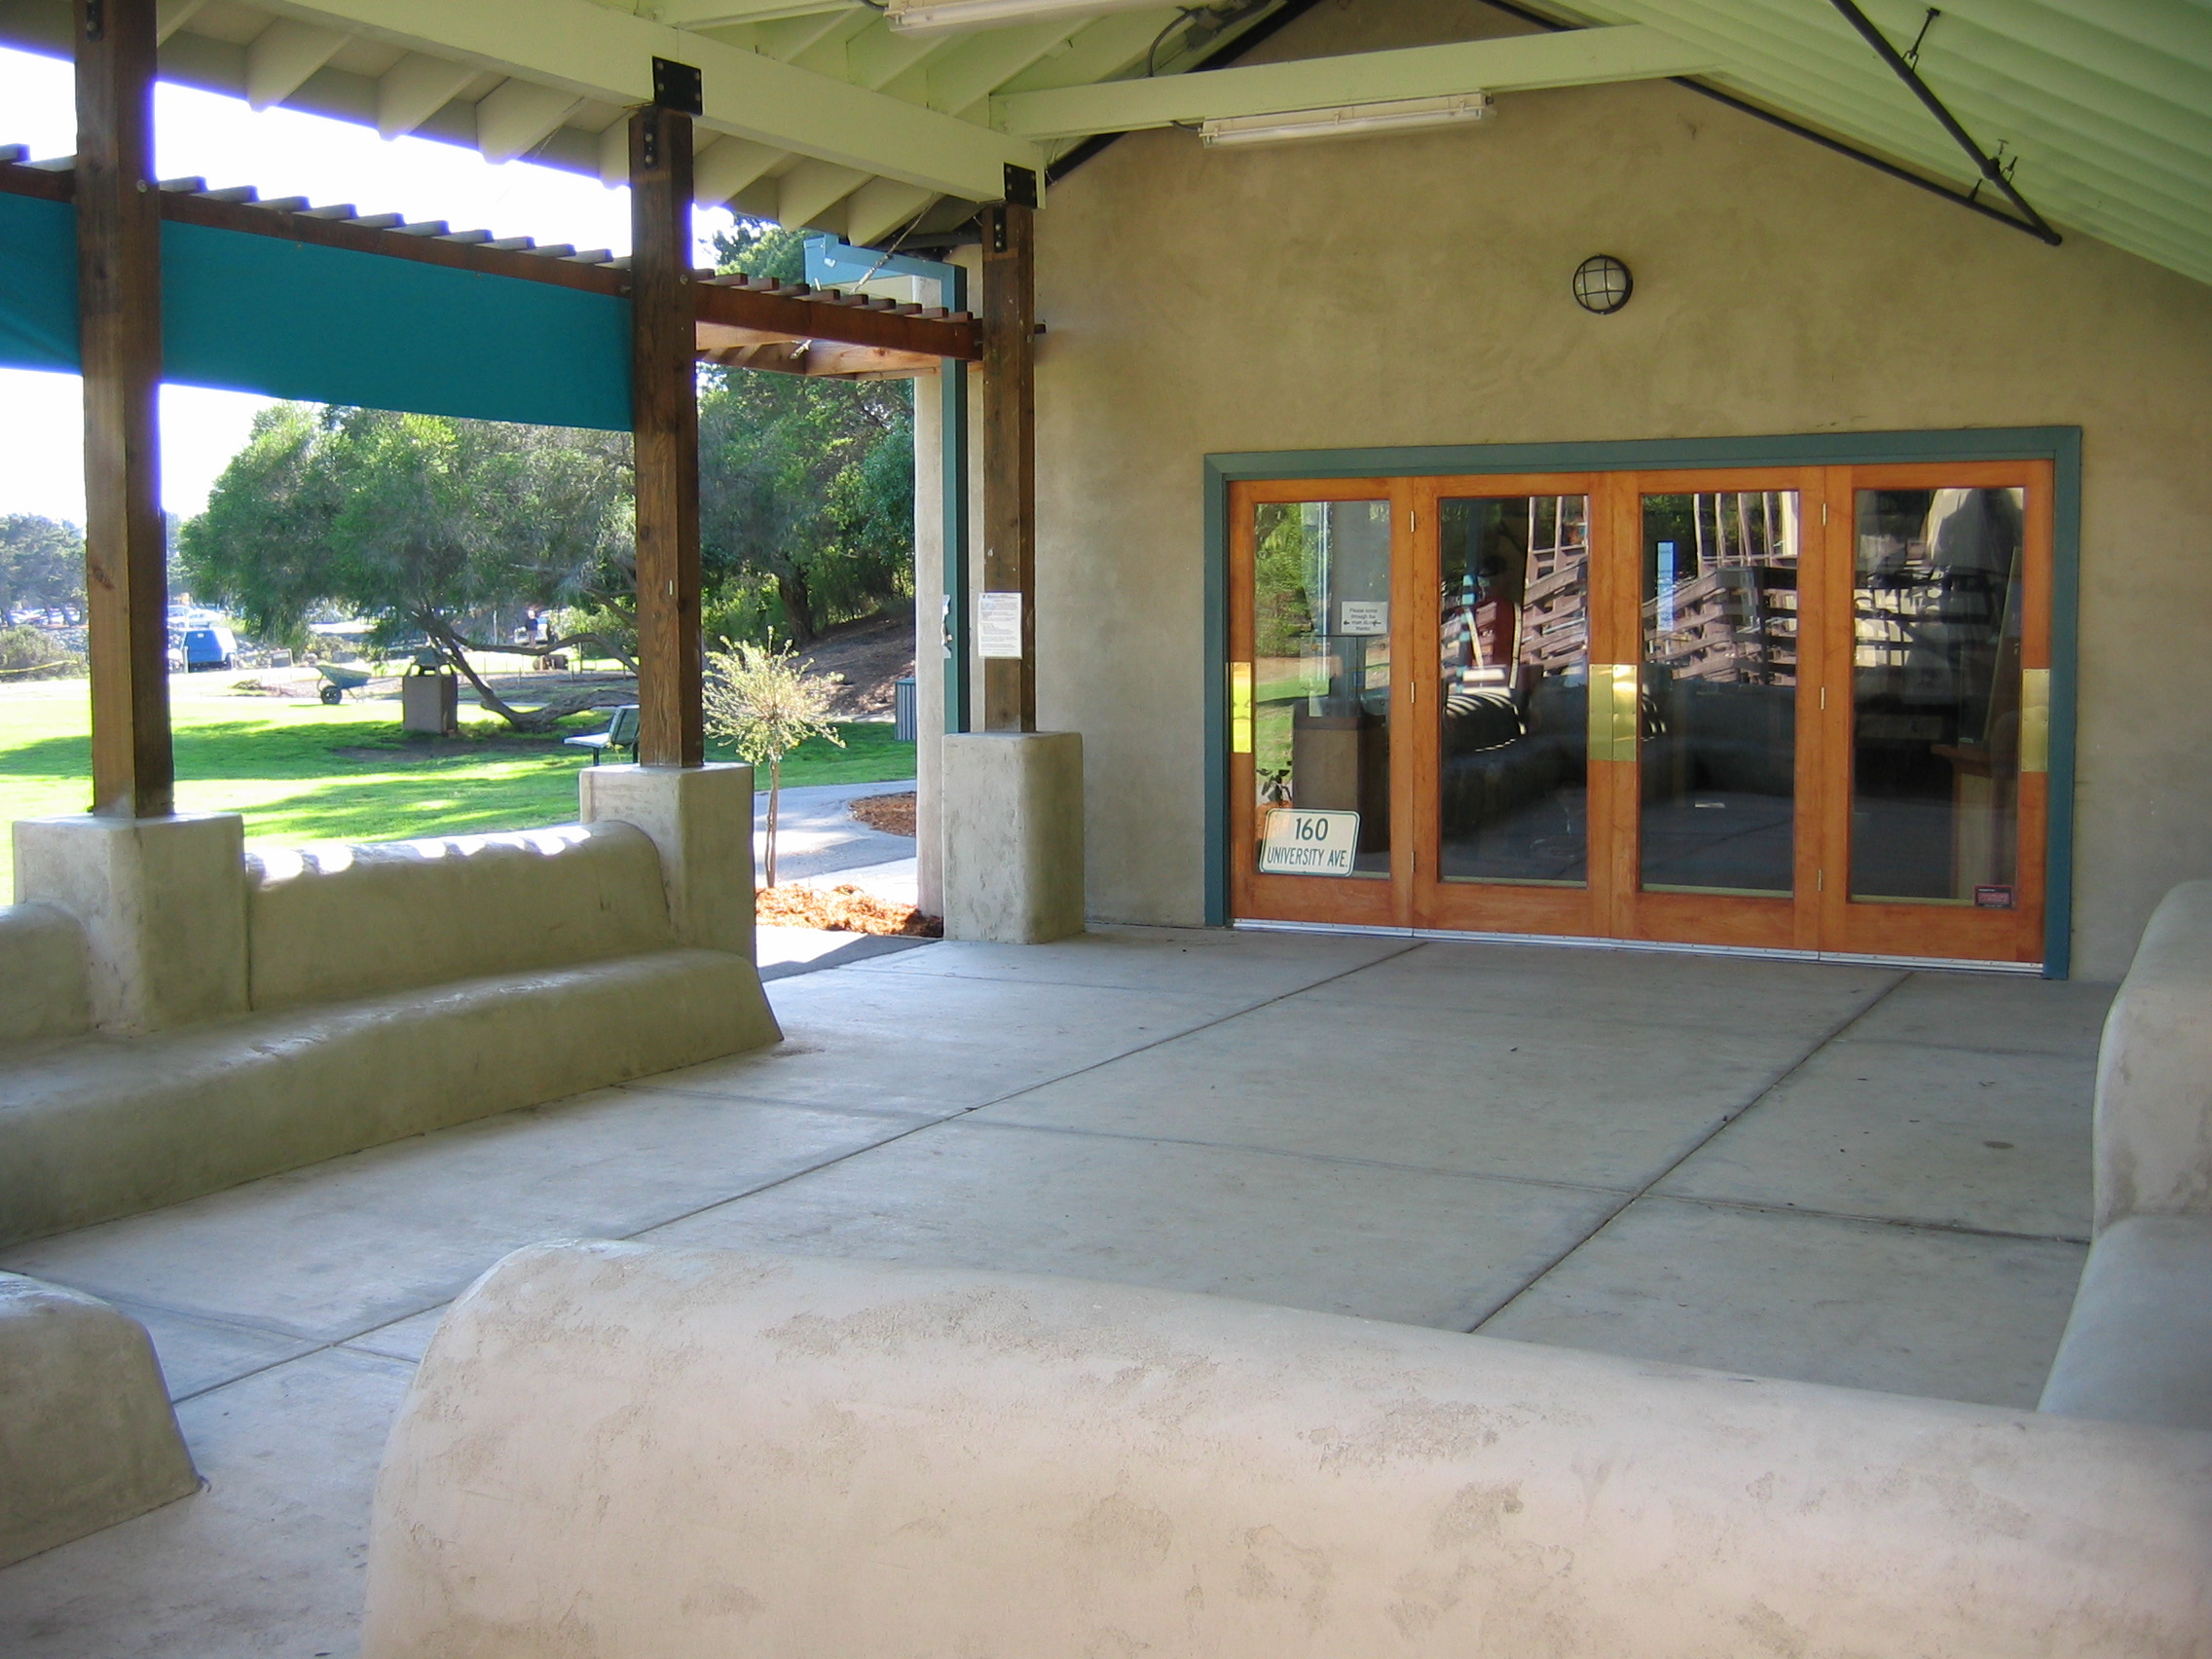  Strawbale seating &nbsp;in the outdoor classroom 